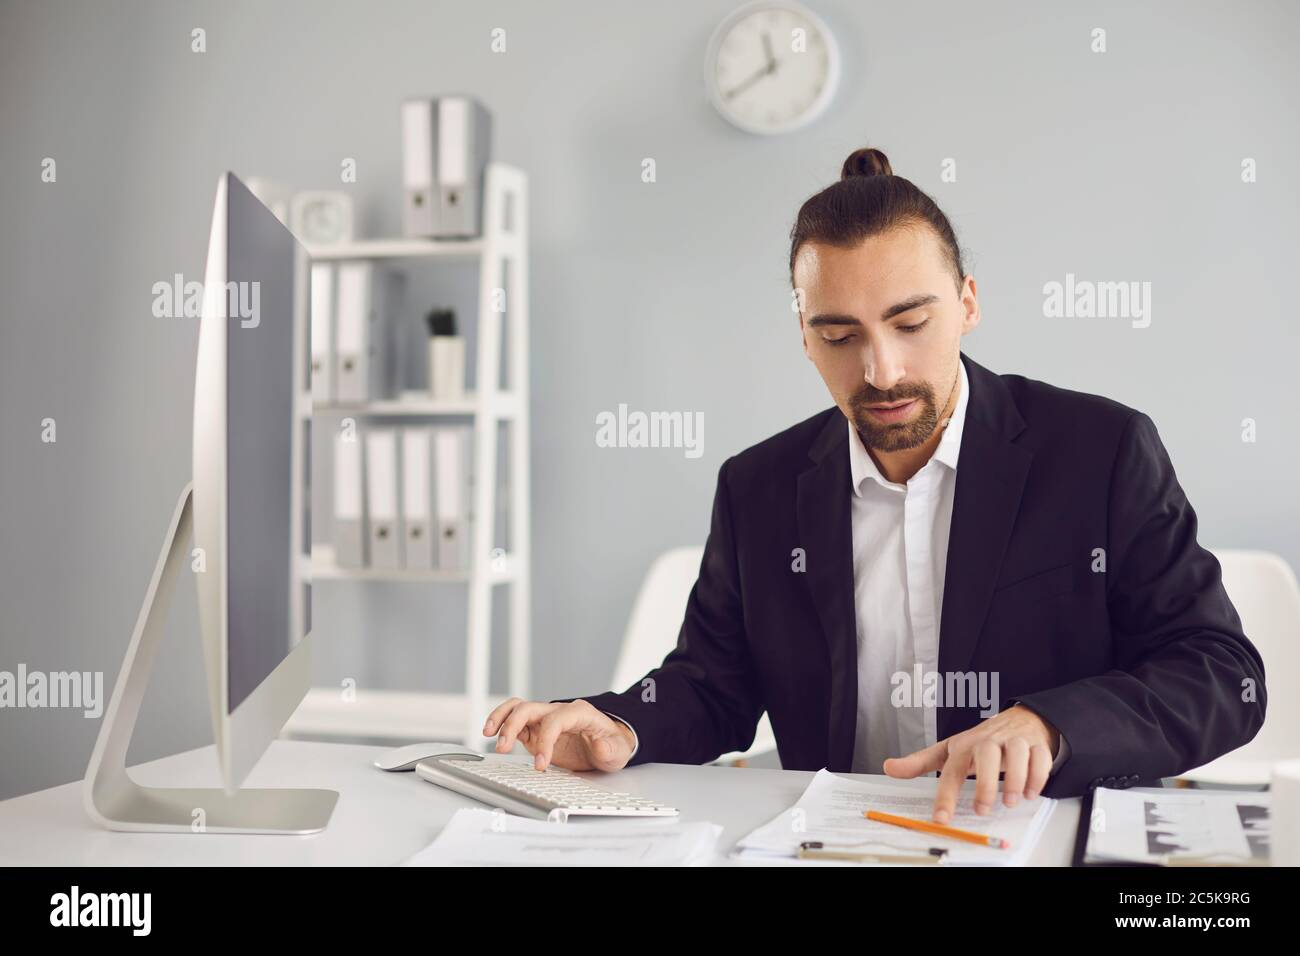 Businessman in a black jacket works. Analyzes at the computer in the office. Stock Photo